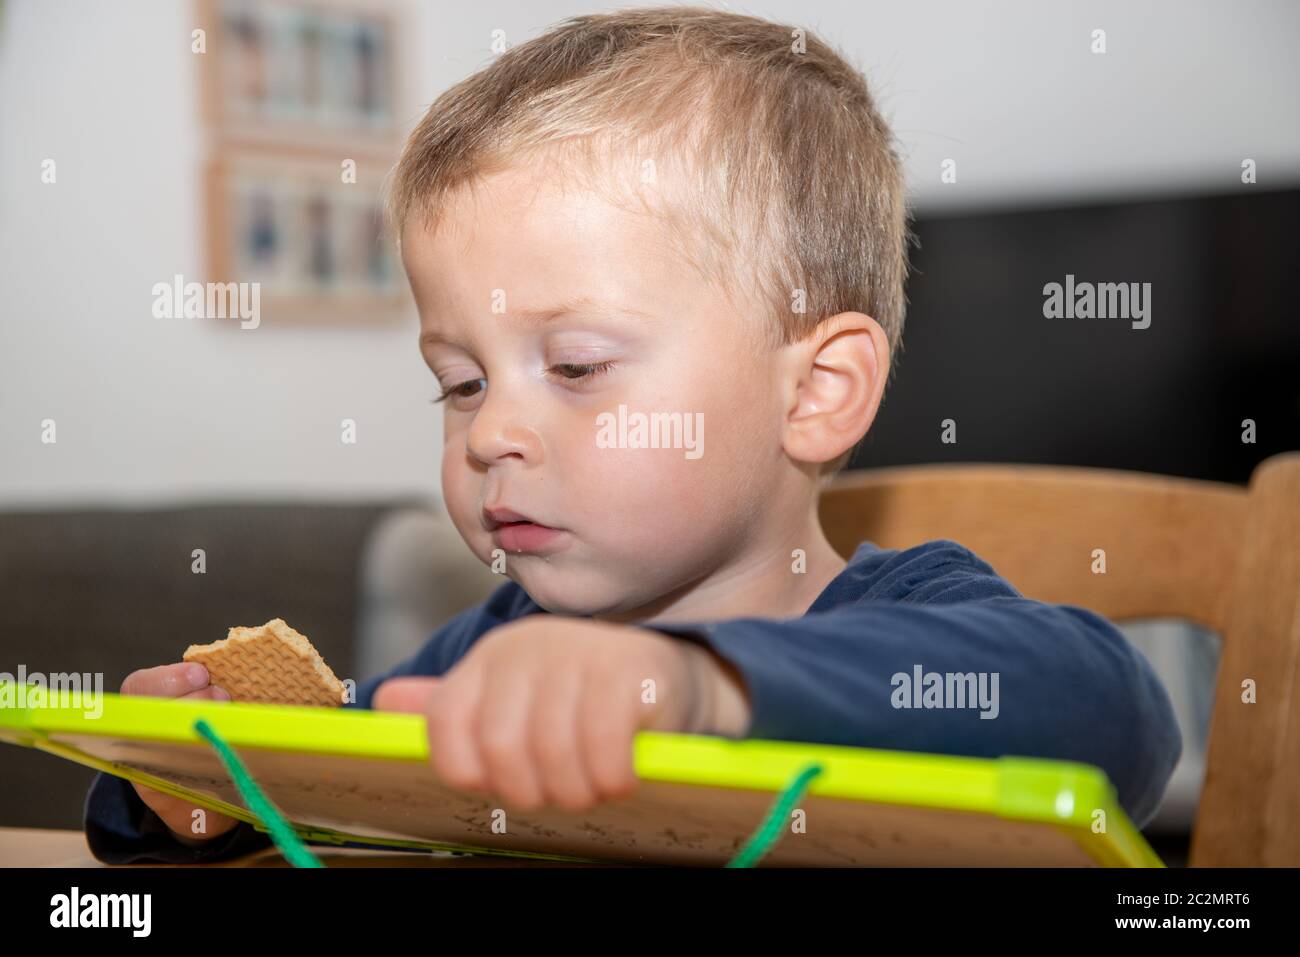 two year old boy eating a small cake Stock Photo